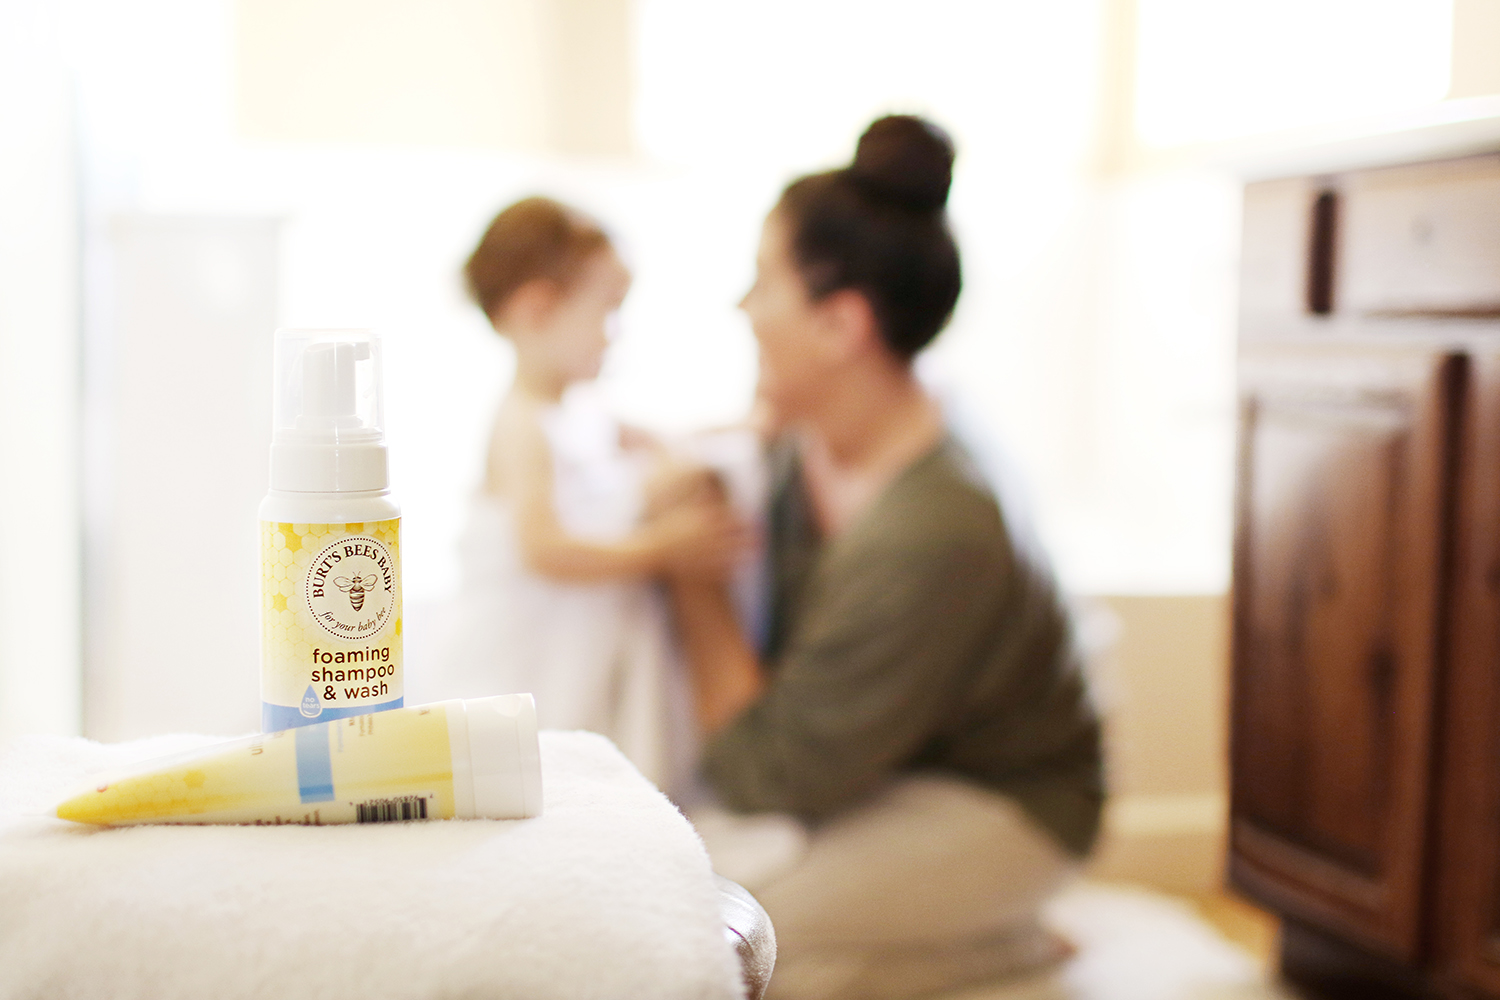 Benefits of a bedtime routine and why ours along with Burt's Bees Baby has really helped us through the transition of moving. Catch it all now on Haus of Layne! #BurtsBees #BedtimeRoutine #Baby #Motherhood